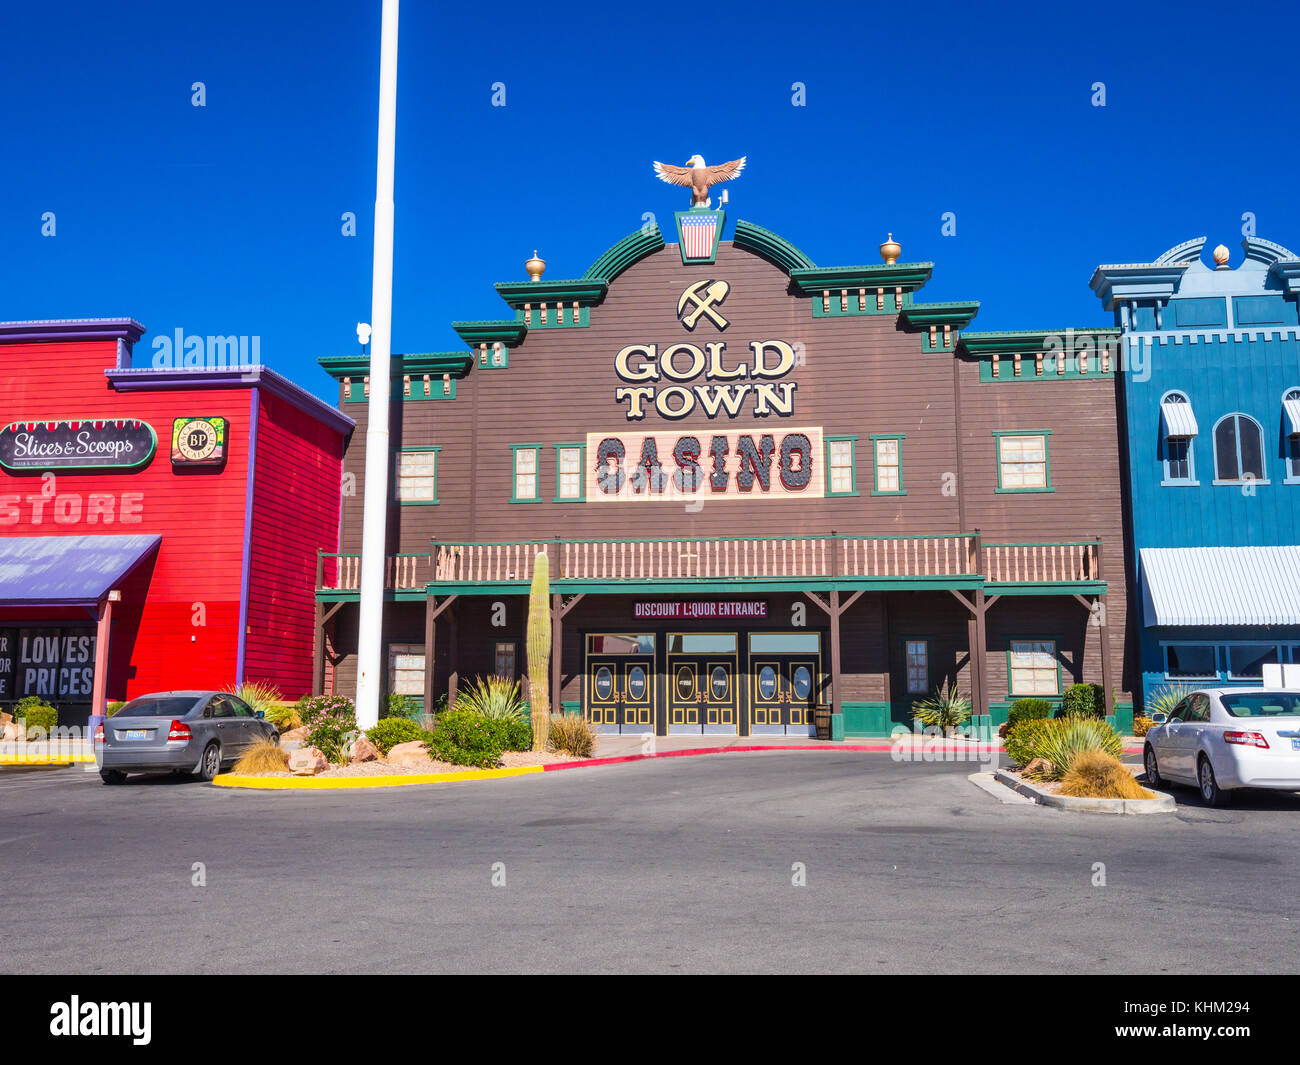 Largest indian casino in usa